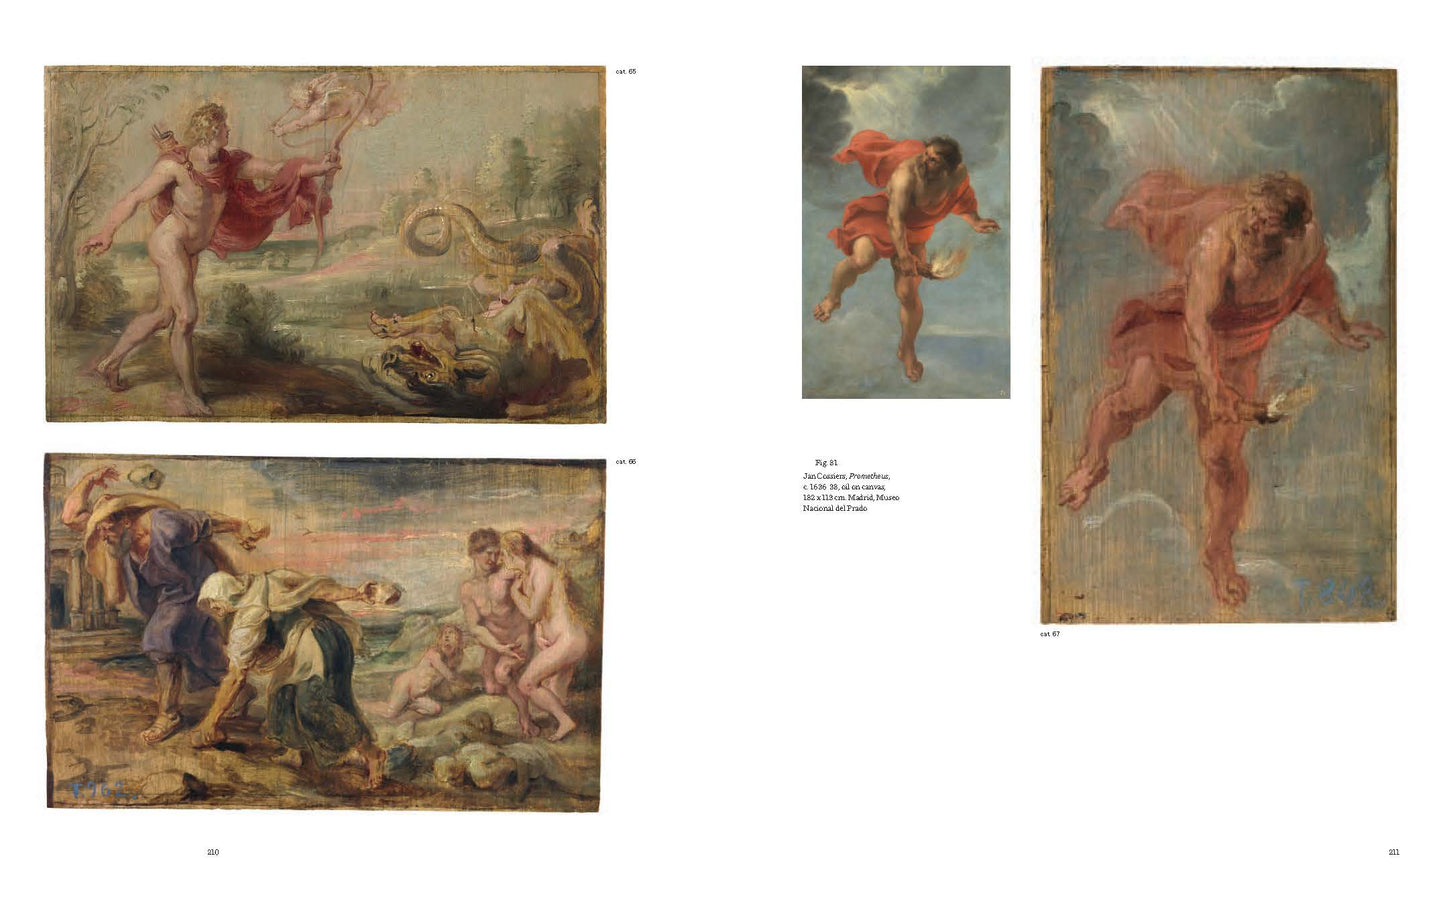 Rubens - Painter of Sketches